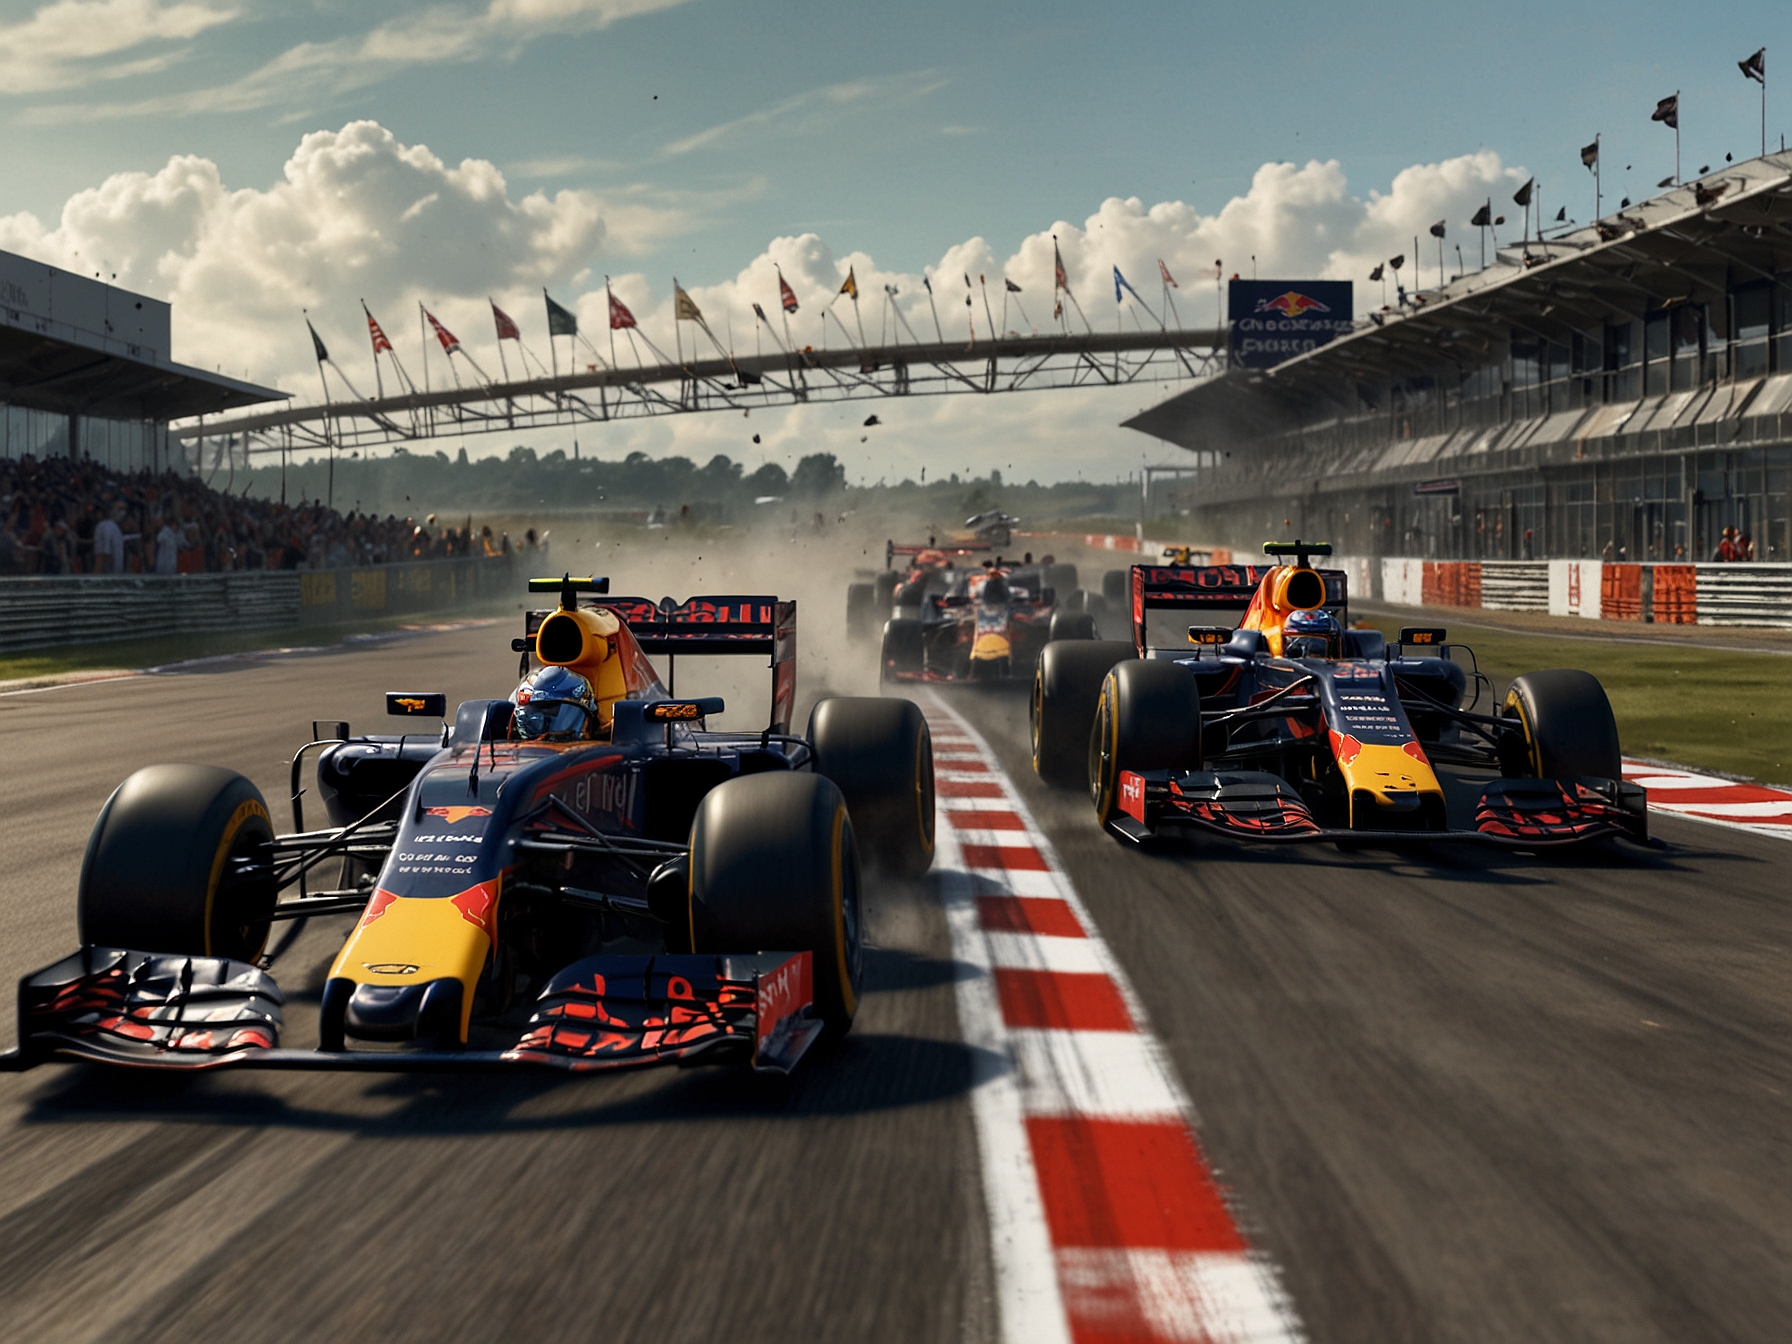 A dynamic shot of the Silverstone Circuit showcasing its iconic fast corners, with Red Bull Racing cars in action, symbolizing their competitive spirit and the tension leading up to the British Grand Prix.